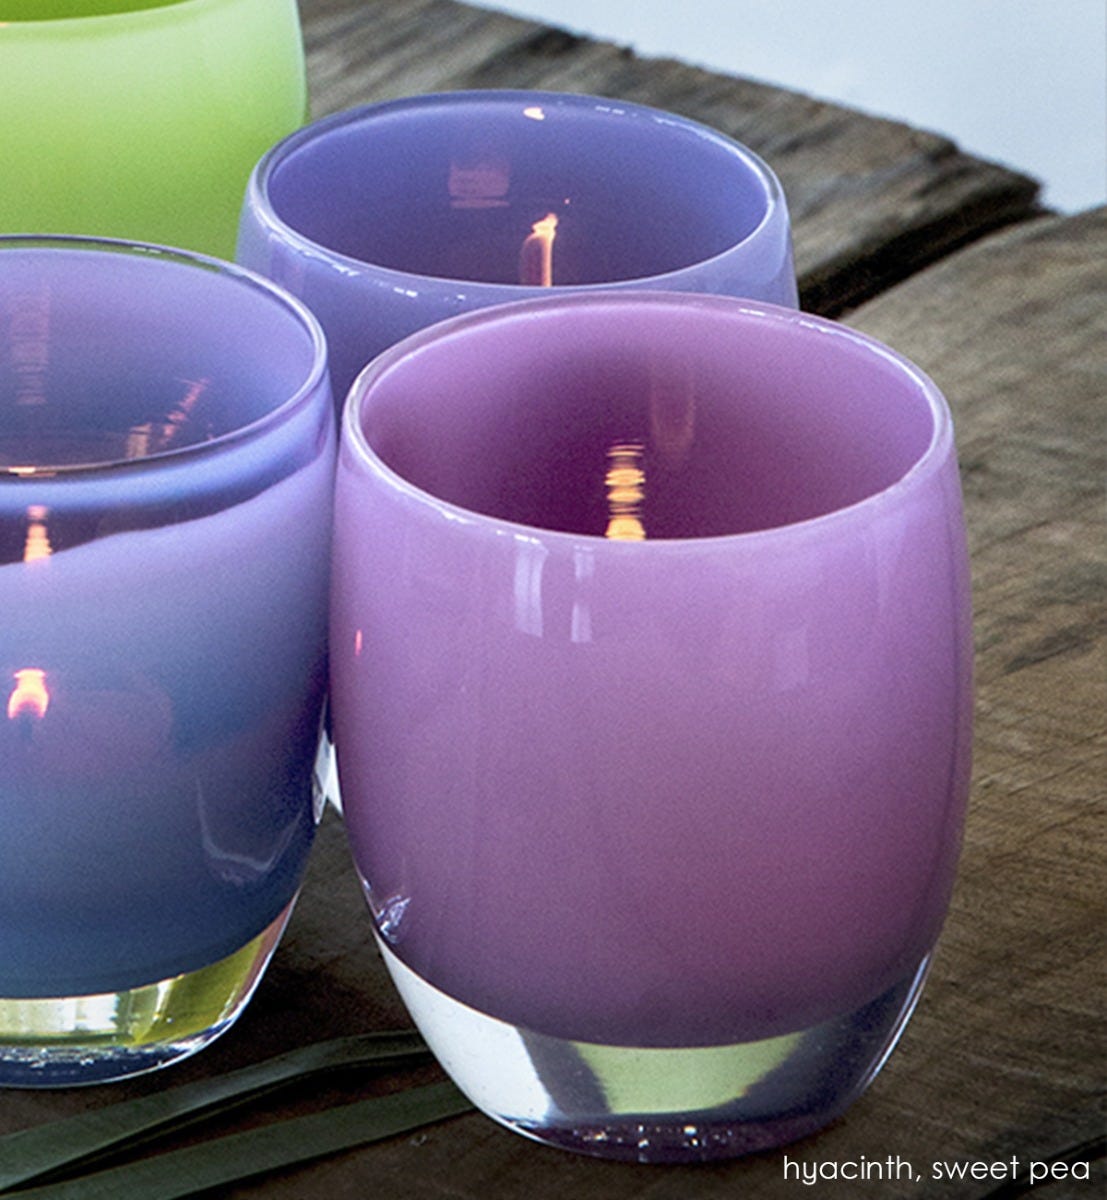 sweet pea, iris hand-blown glass votive candle holder. Paired with hyacinth.